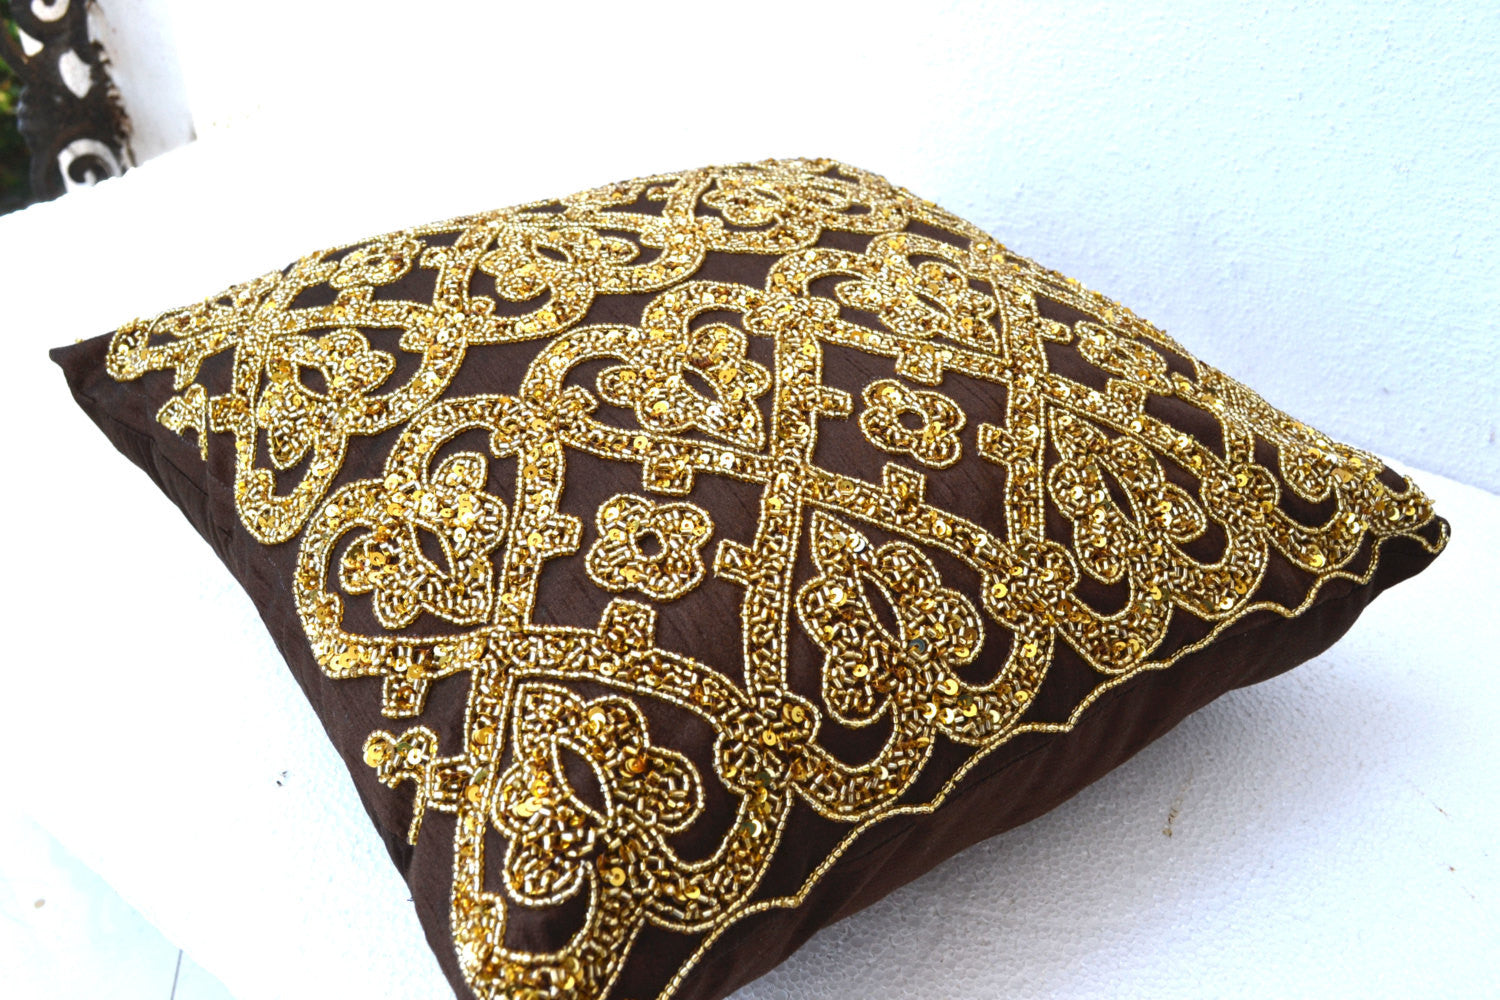 Shop for handmade pink gold silk pillows with sequin and color